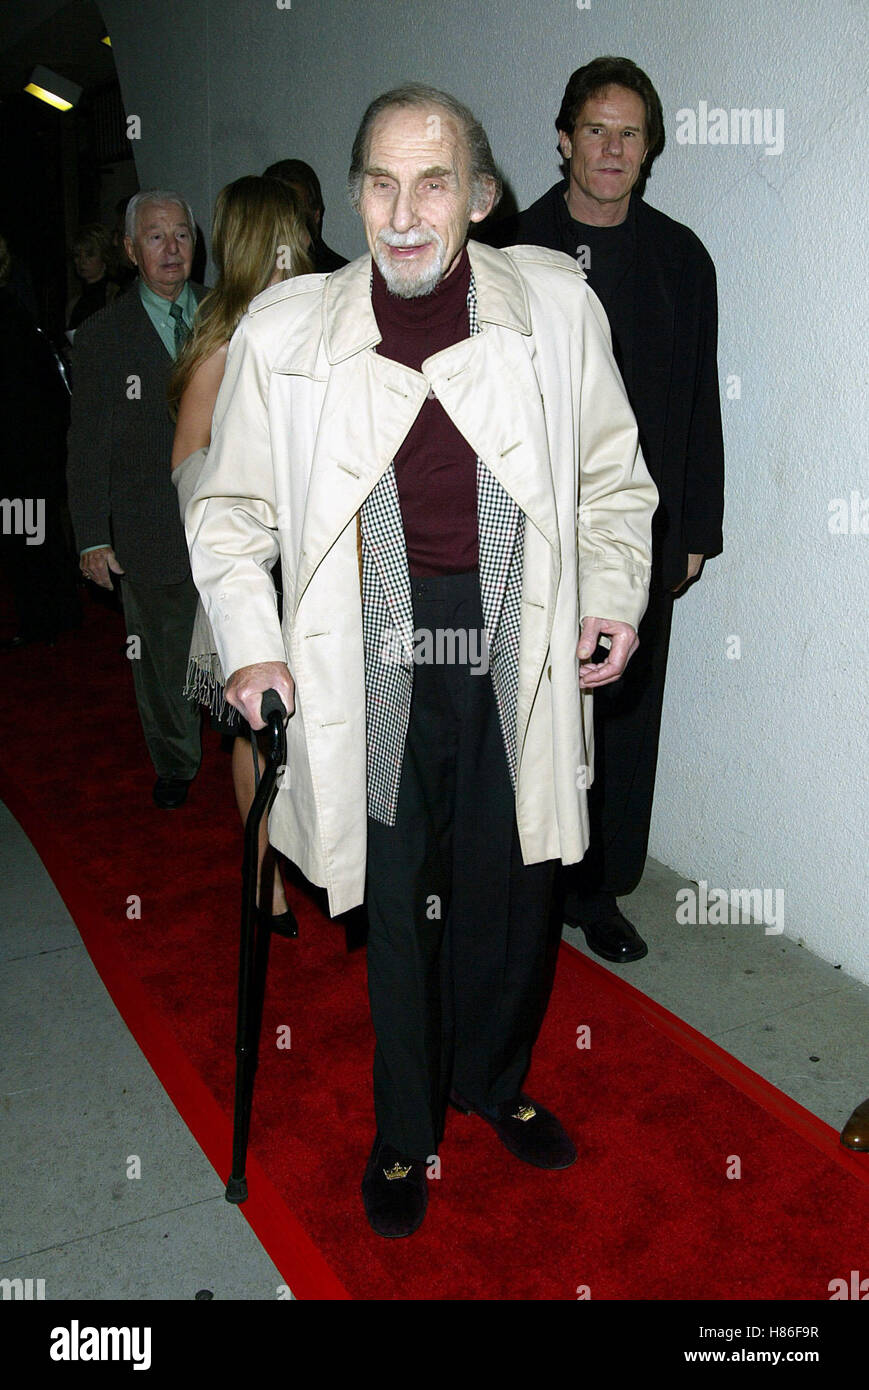 SID CAESAR NORBY WALTERS HOLIDAY PARTY FRIARS CLUB BEVERLY HILLS LOS ANGELES US 24 November 2002 Stock Photo